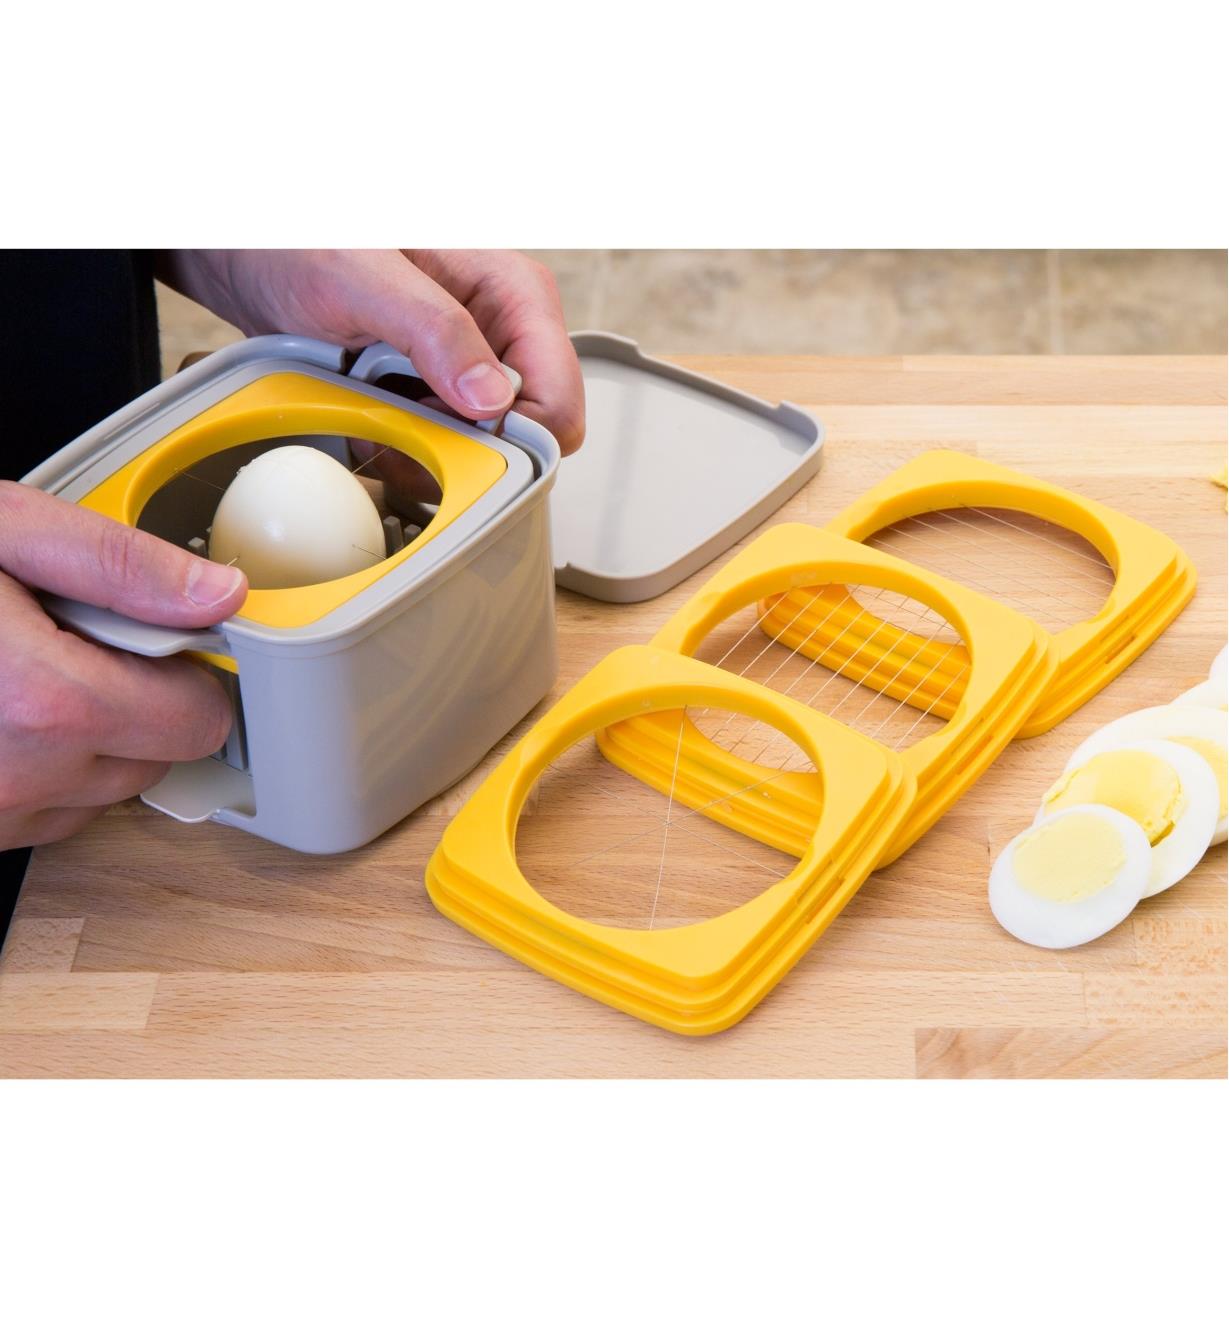 Cutting an egg with the Egg Cutter